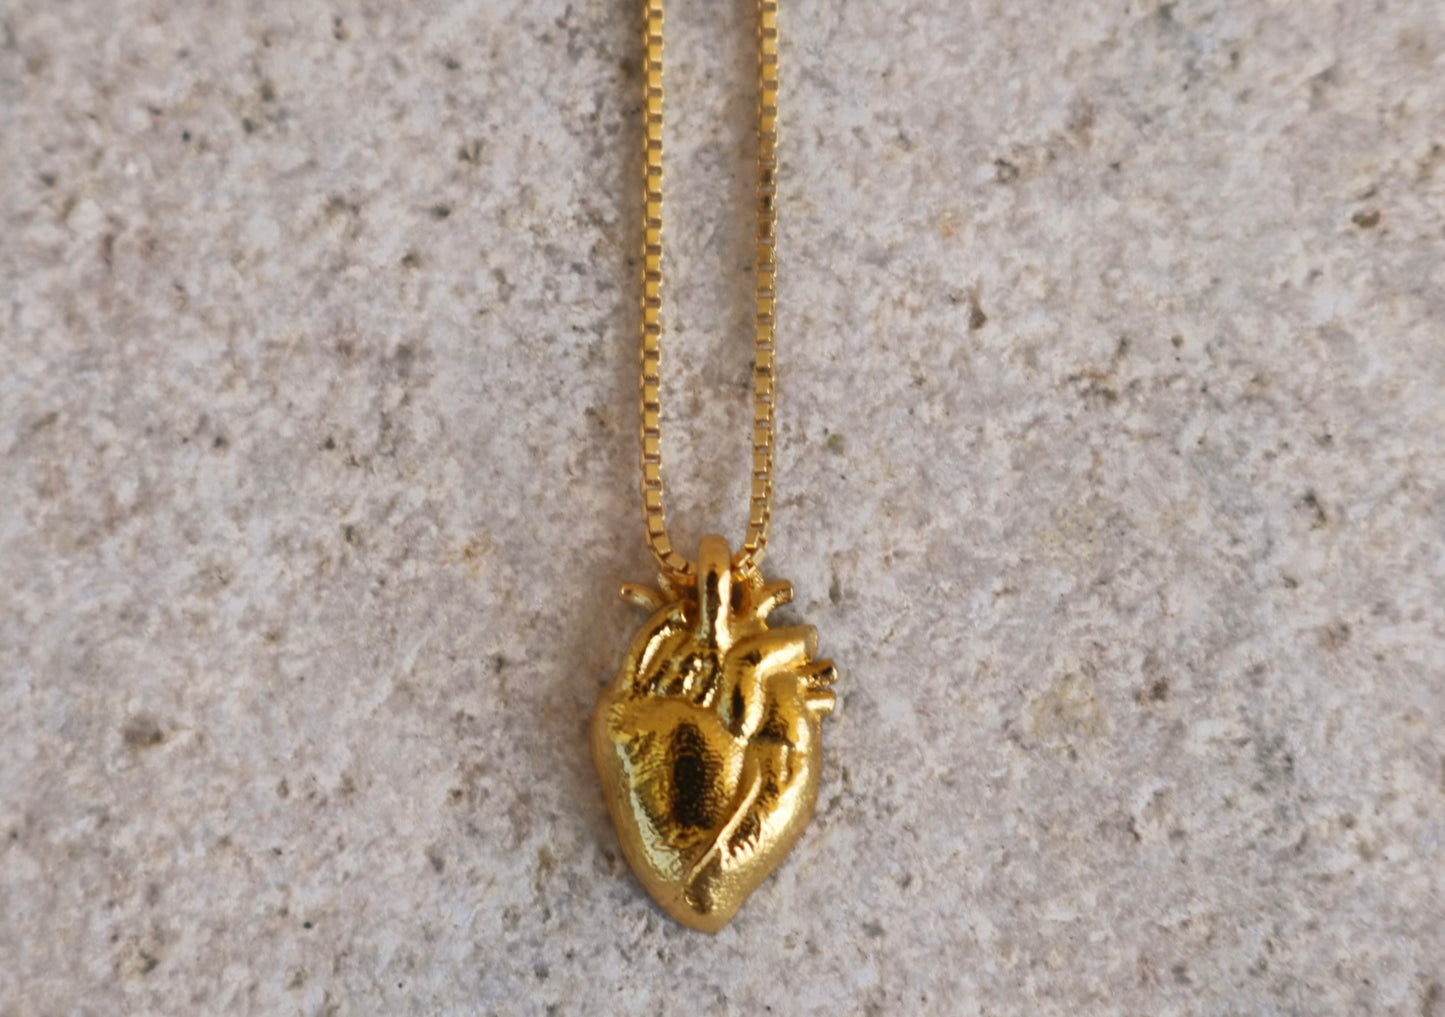 Heart of Gold Pendant Necklace